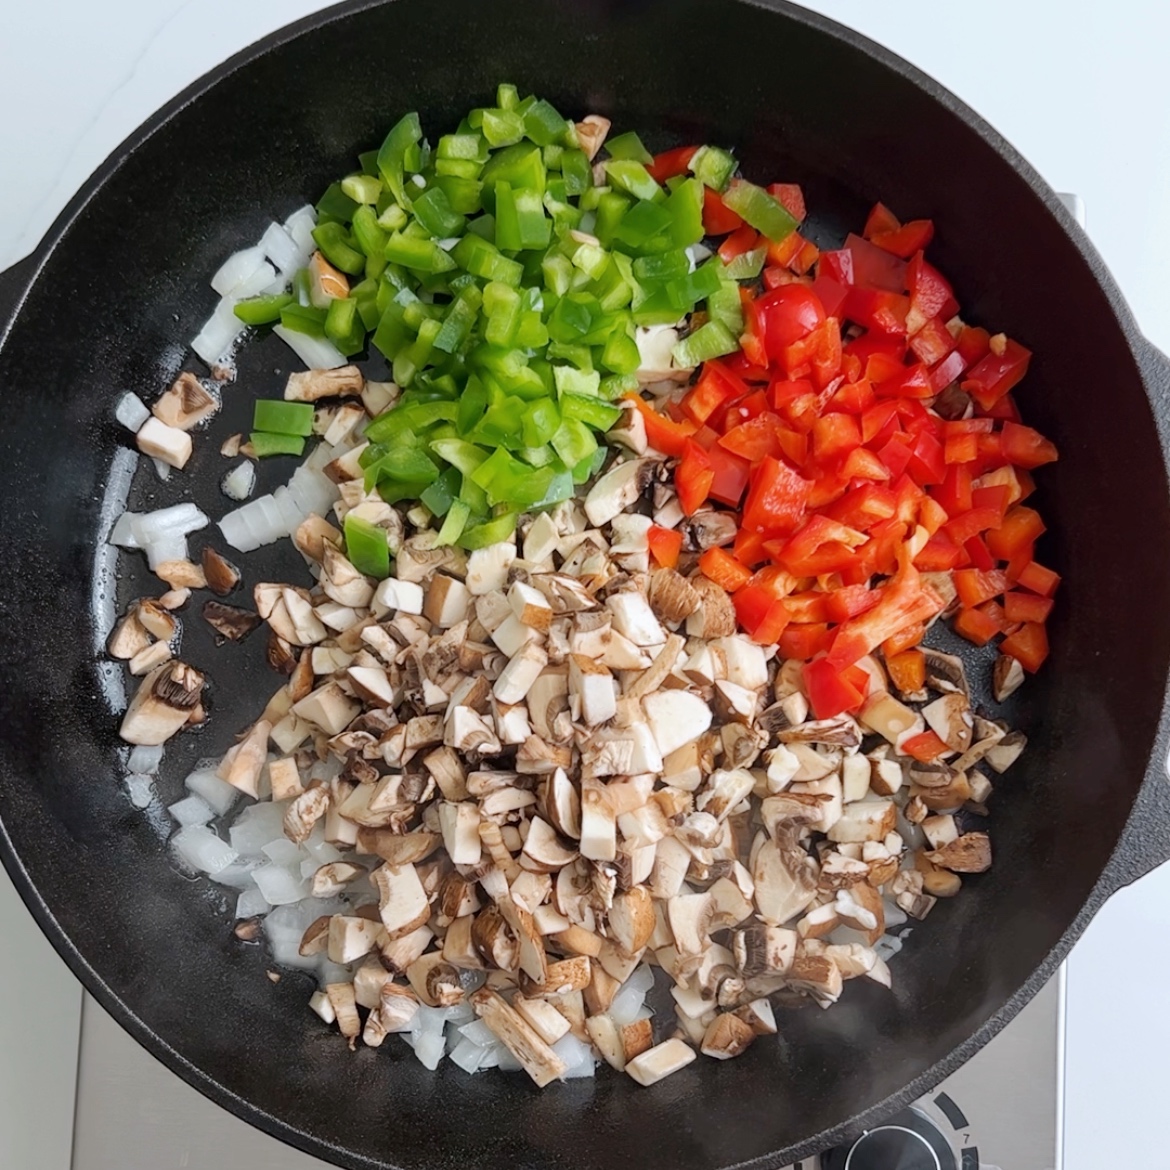 diced and sauteed peppers, onions, and mushrooms in a skillet